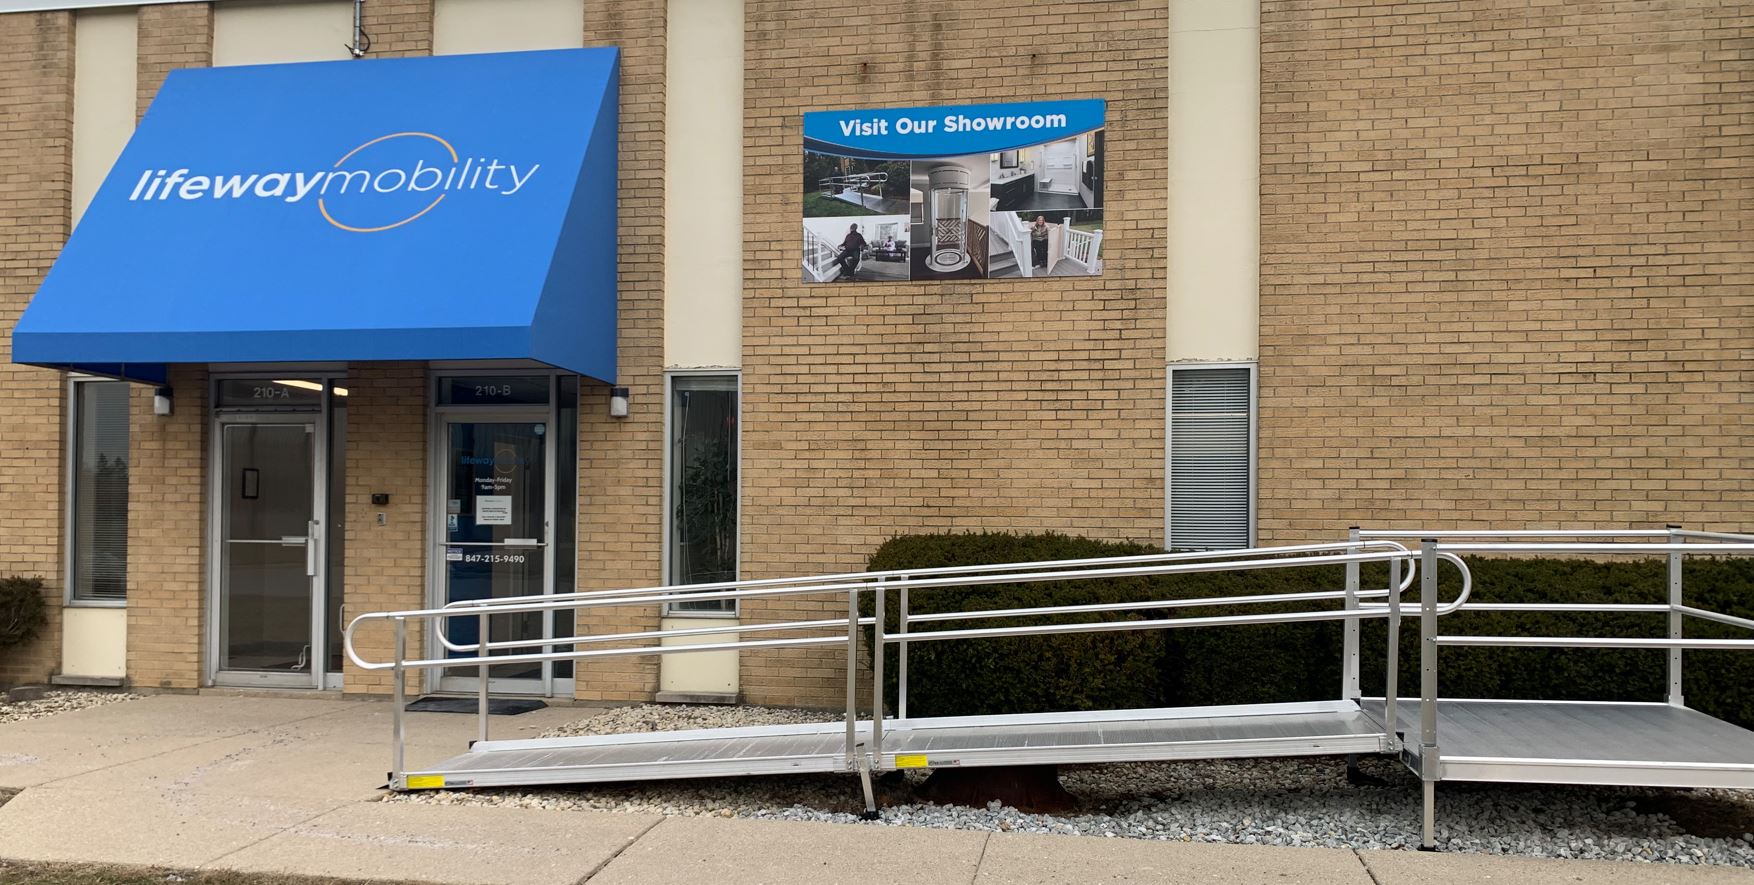 Lifeway Mobility Chicago Showroom Entrance